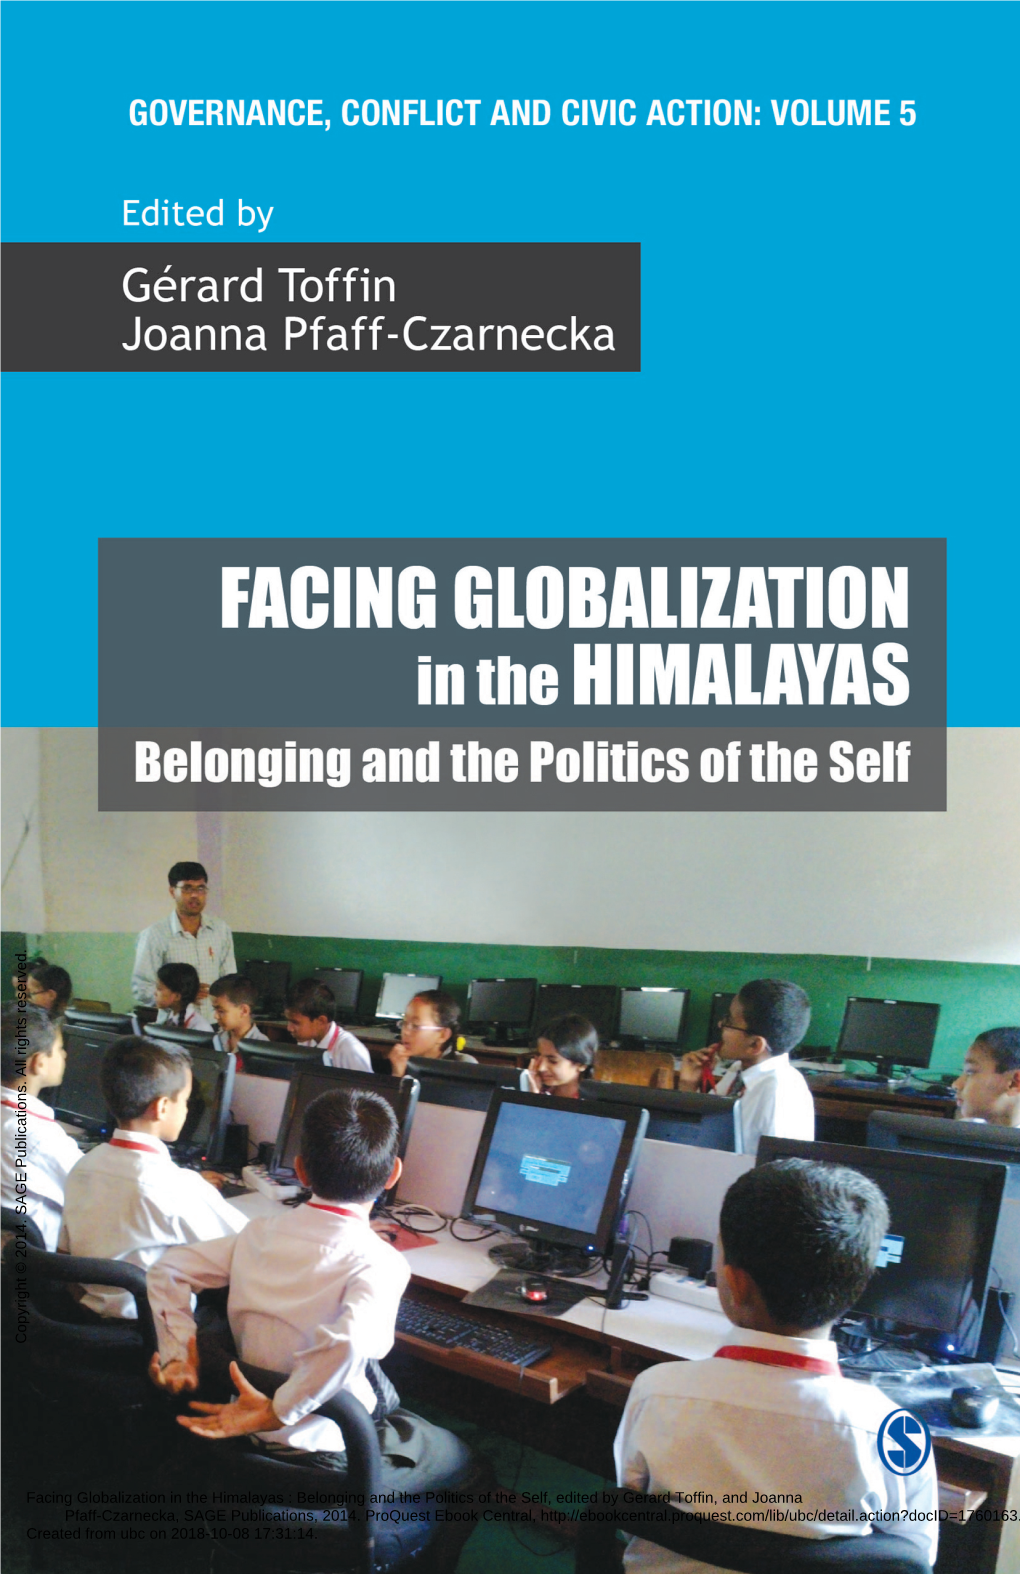 Facing Globalization in the Himalayas : Belonging and the Politics of the Self, Edited by Gerard Toffin, and Joanna Pfaff-Czarnecka, SAGE Publications, 2014